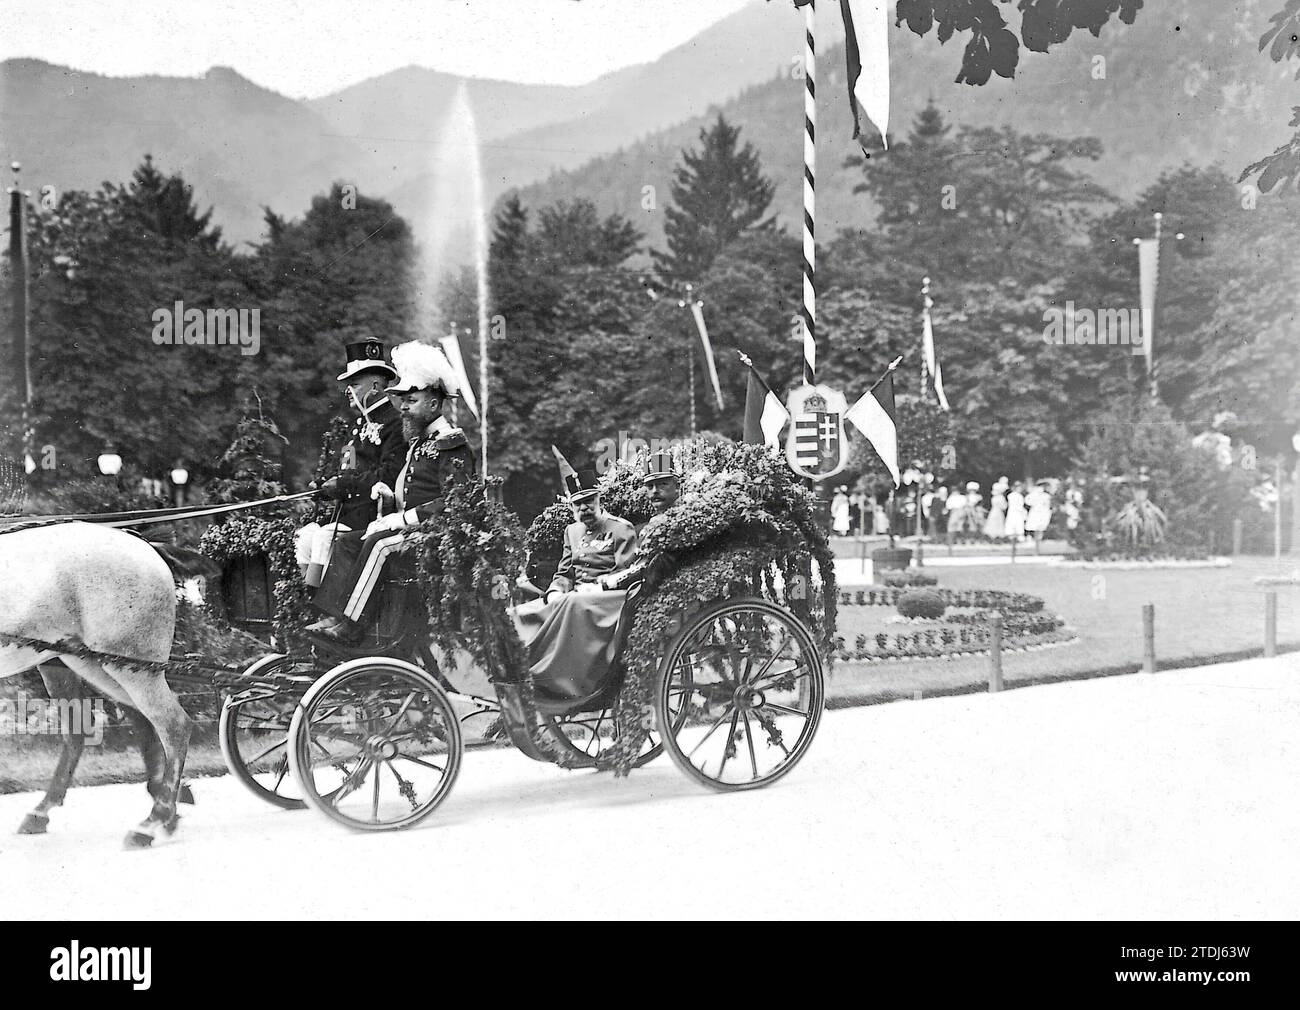 07/31/1910. The 80th anniversary of the Emperor of Austria-Hungary. His Majesty Francis Joseph I, accompanied by Archduke Francis Salvador, in the carriage Adorned with Flowers that He Used to go to the gala banquet of Ischl, which was attended by seventy Individuals of the Habsburg family, Relatives of the Emperor. Credit: Album / Archivo ABC / Charles Trampus Stock Photo